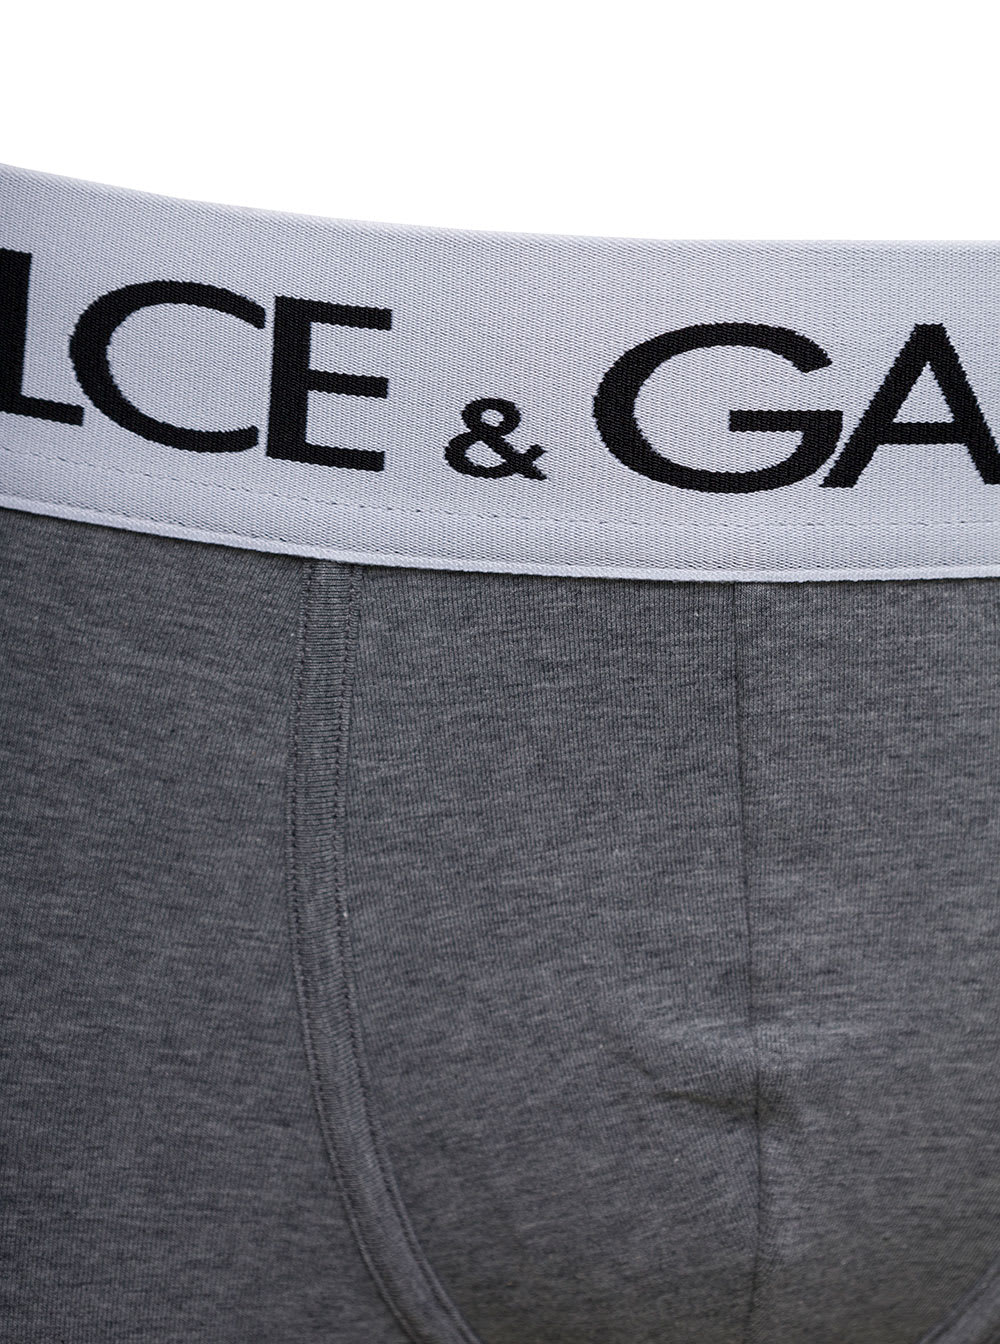 Shop Dolce & Gabbana Grey Boxer Briefs With Branded Waistband In Stretch Cotton Man